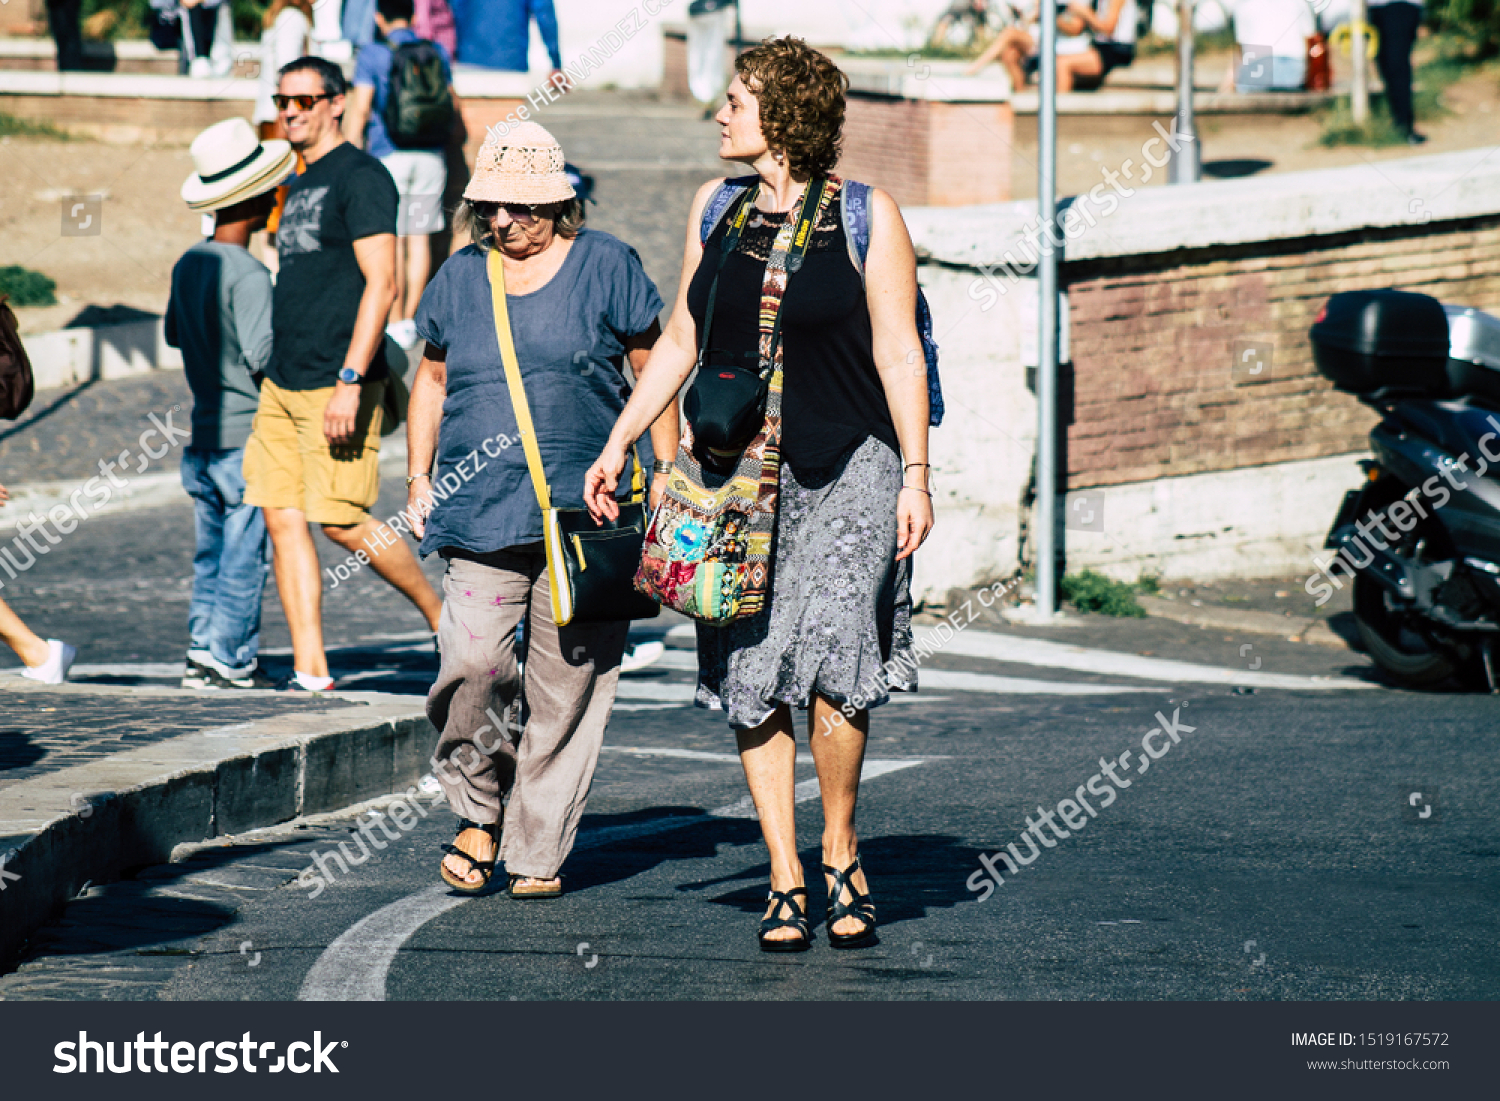 Rome Italy September 29, 2019 View of unknowns tourist visiting the Coliseum also known as the Flavian Amphitheatre in the centre of the city of Rome #1519167572